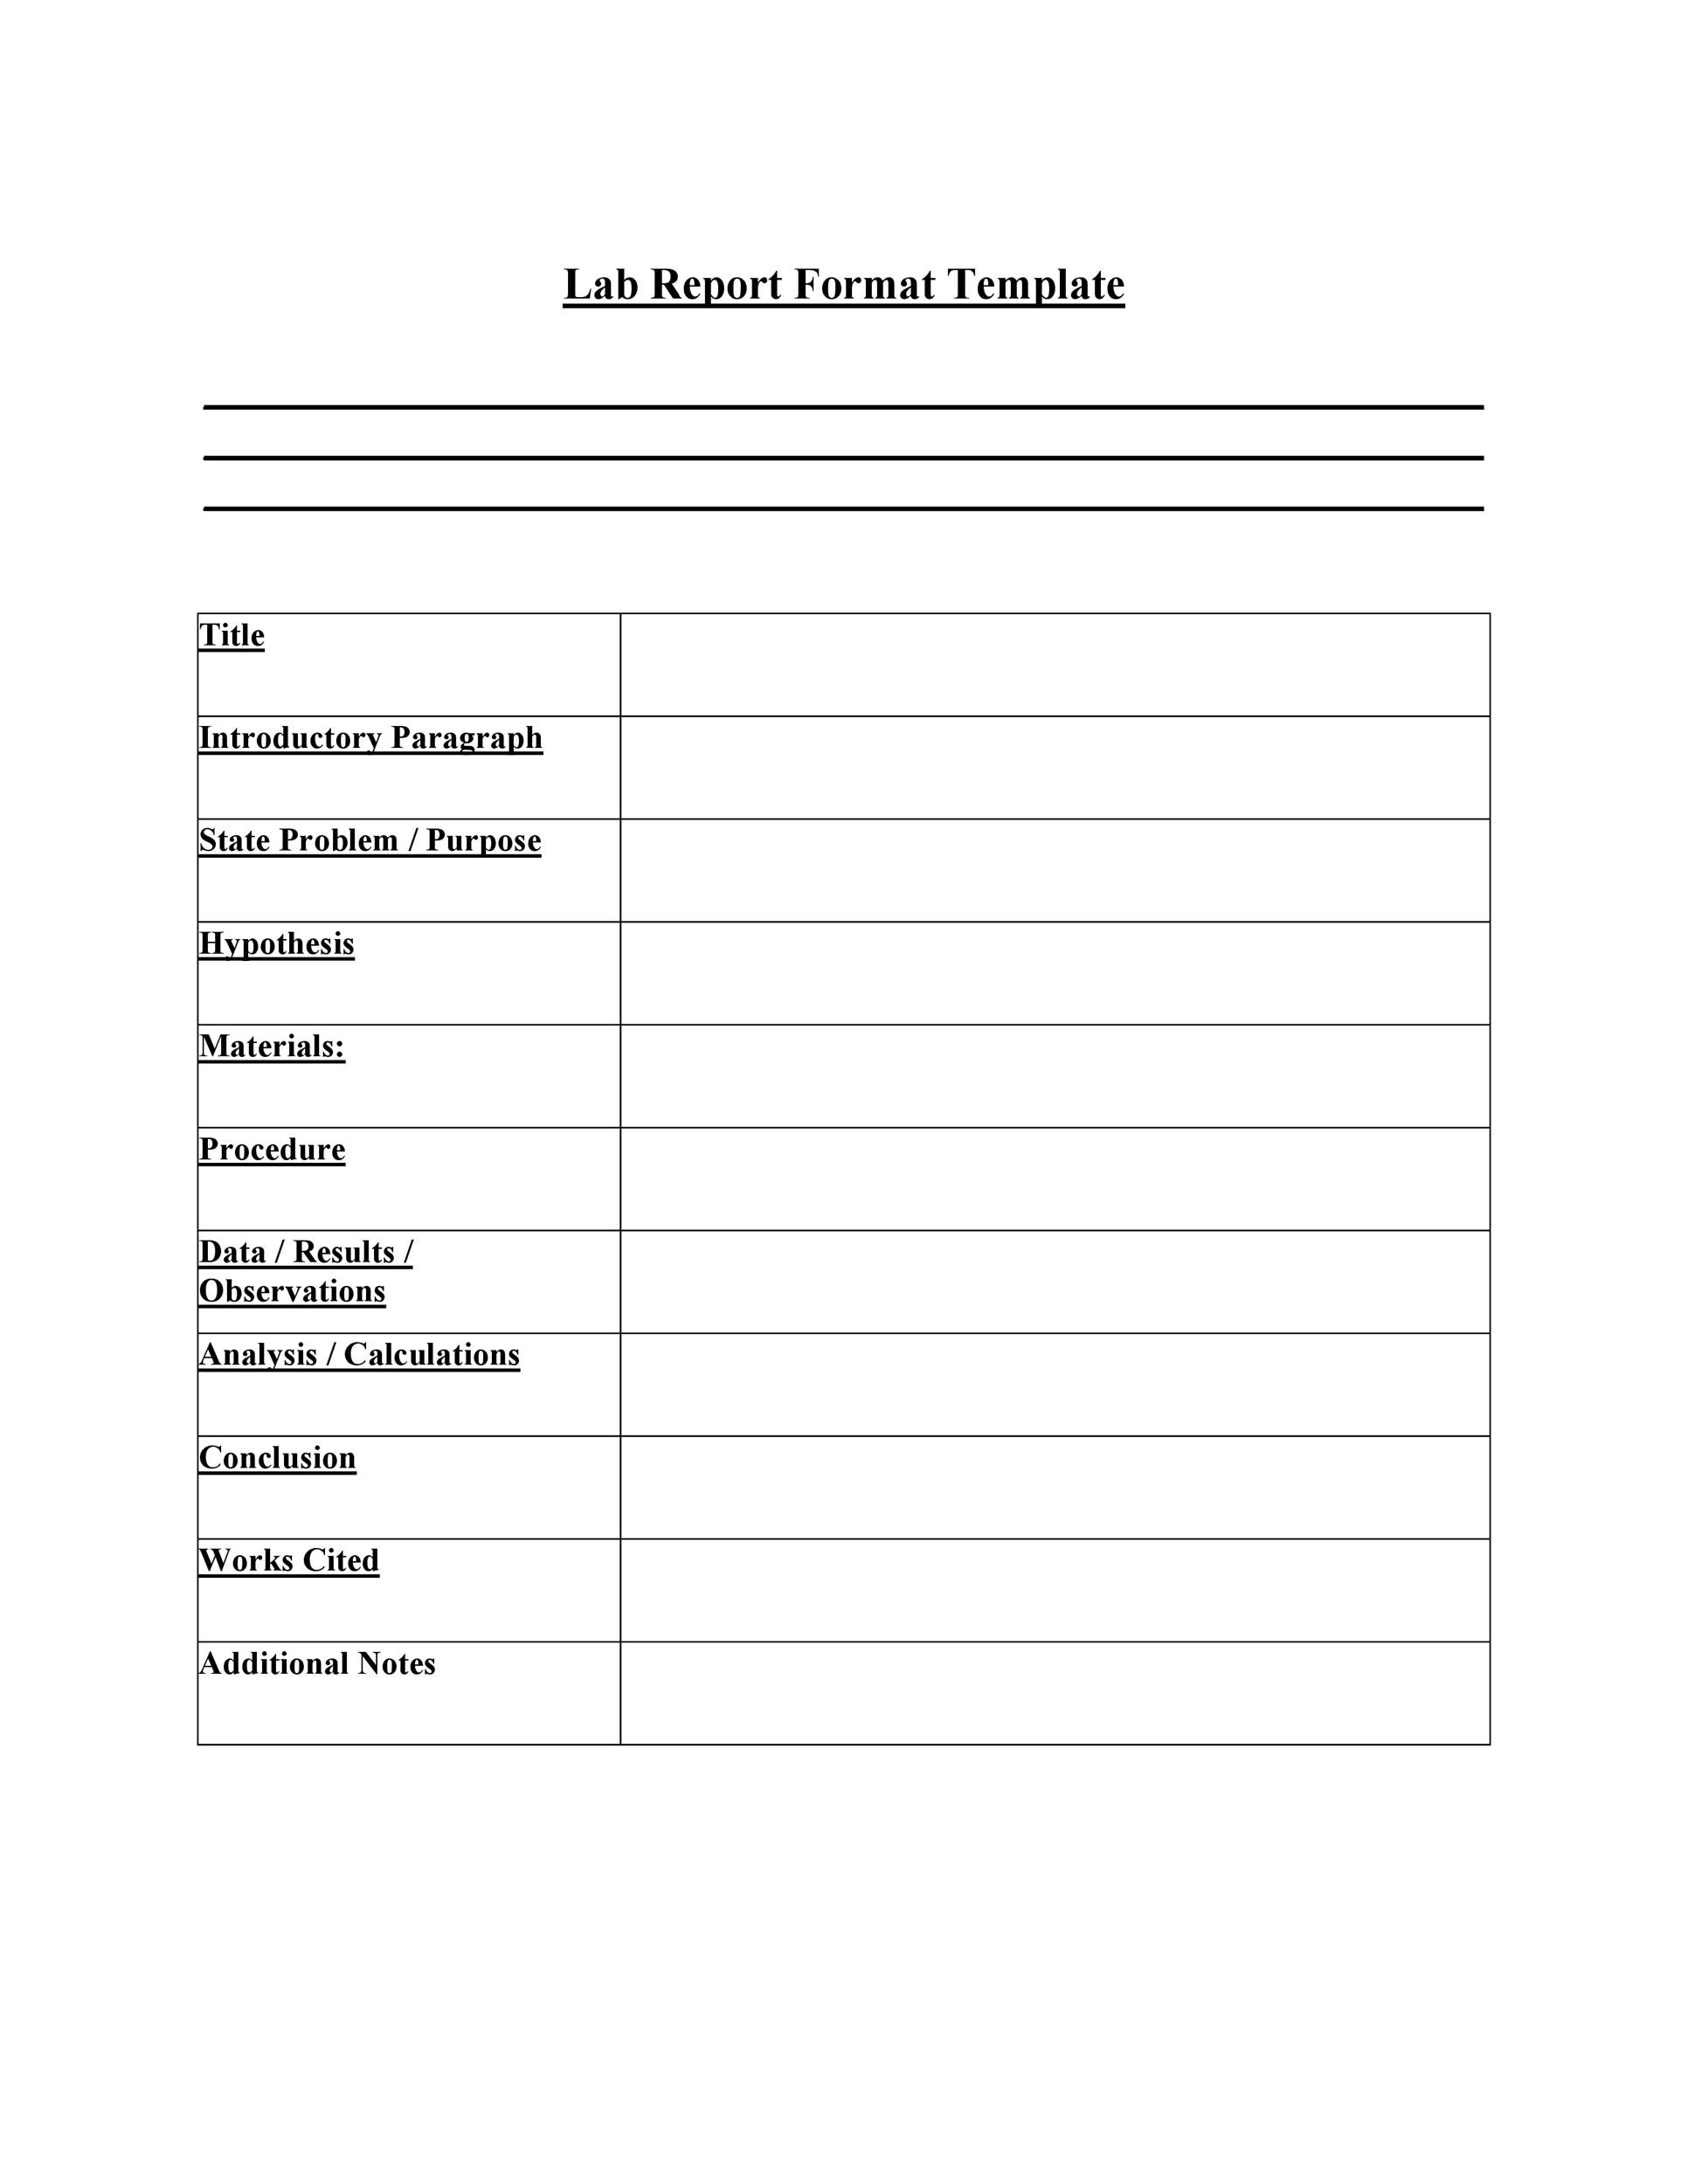 40 Lab Report Templates Format Examples TemplateLab